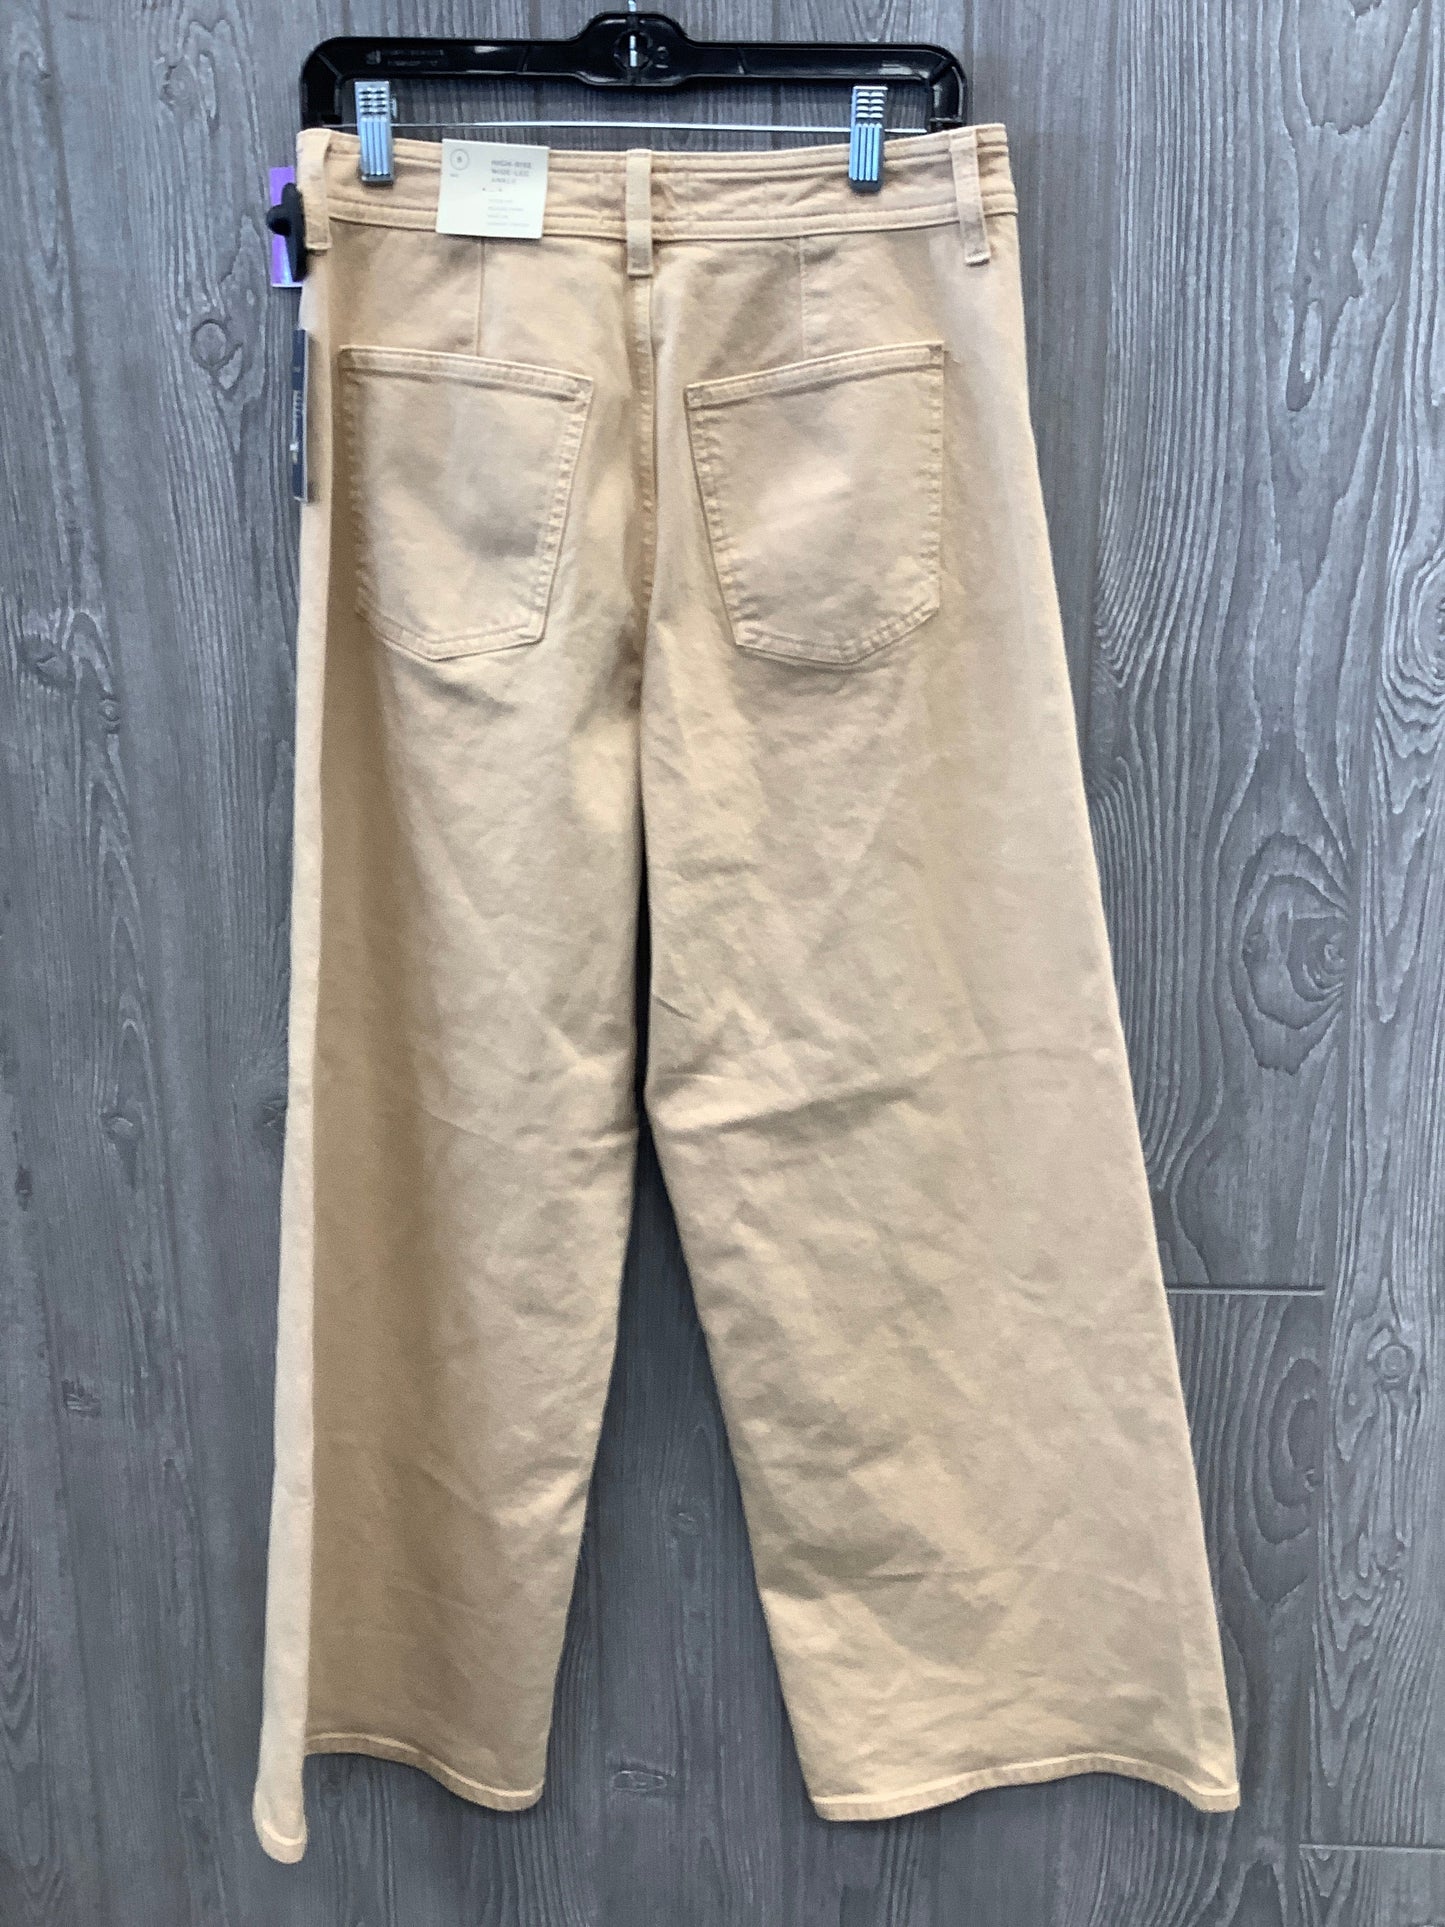 Grey Pants Cropped Croft And Barrow, Size 8